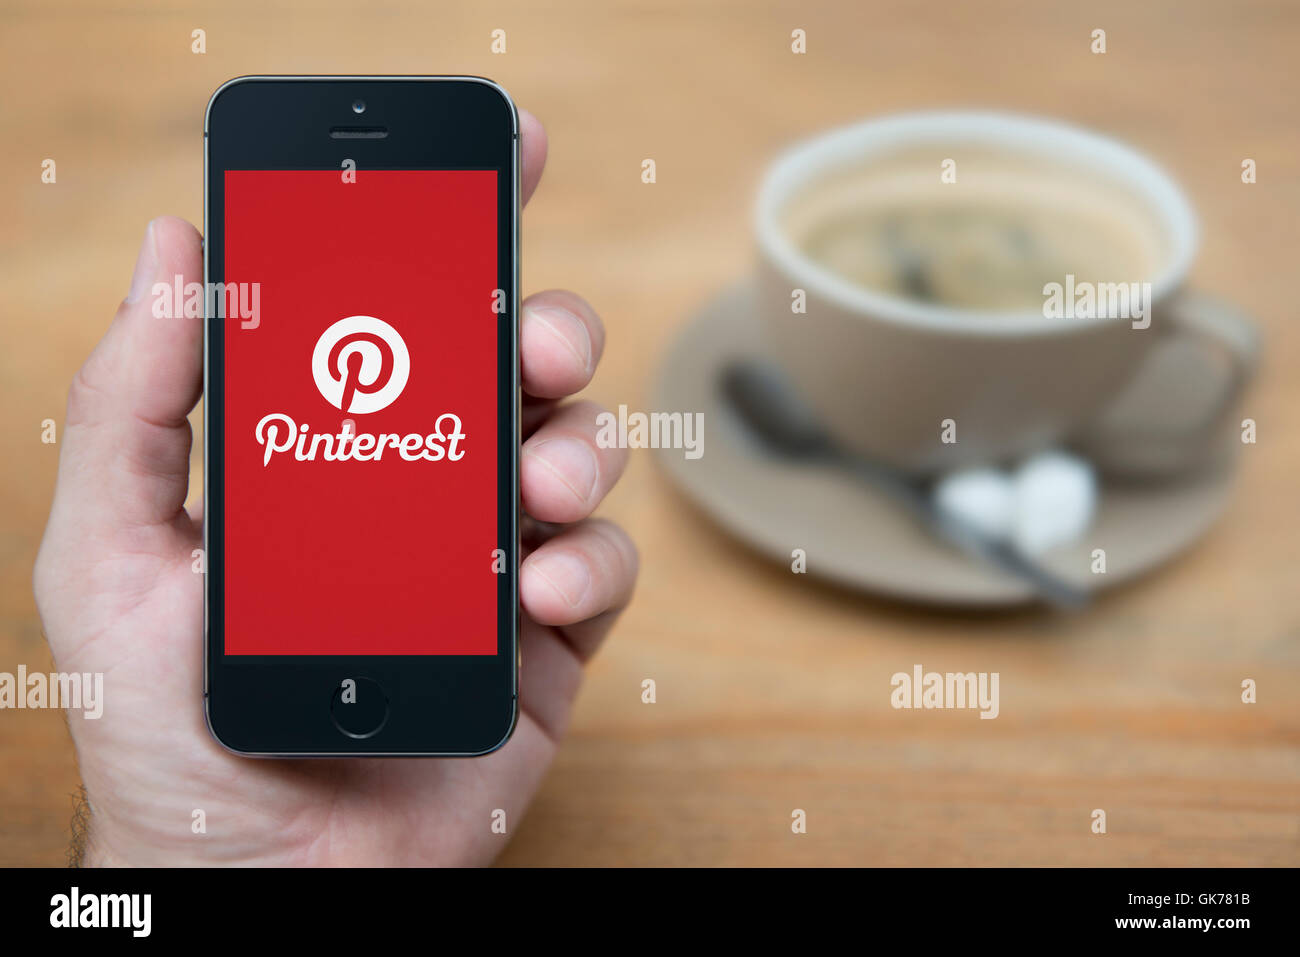 A man looks at his iPhone which displays the Pinterest logo, while sat with a cup of coffee (Editorial use only). Stock Photo